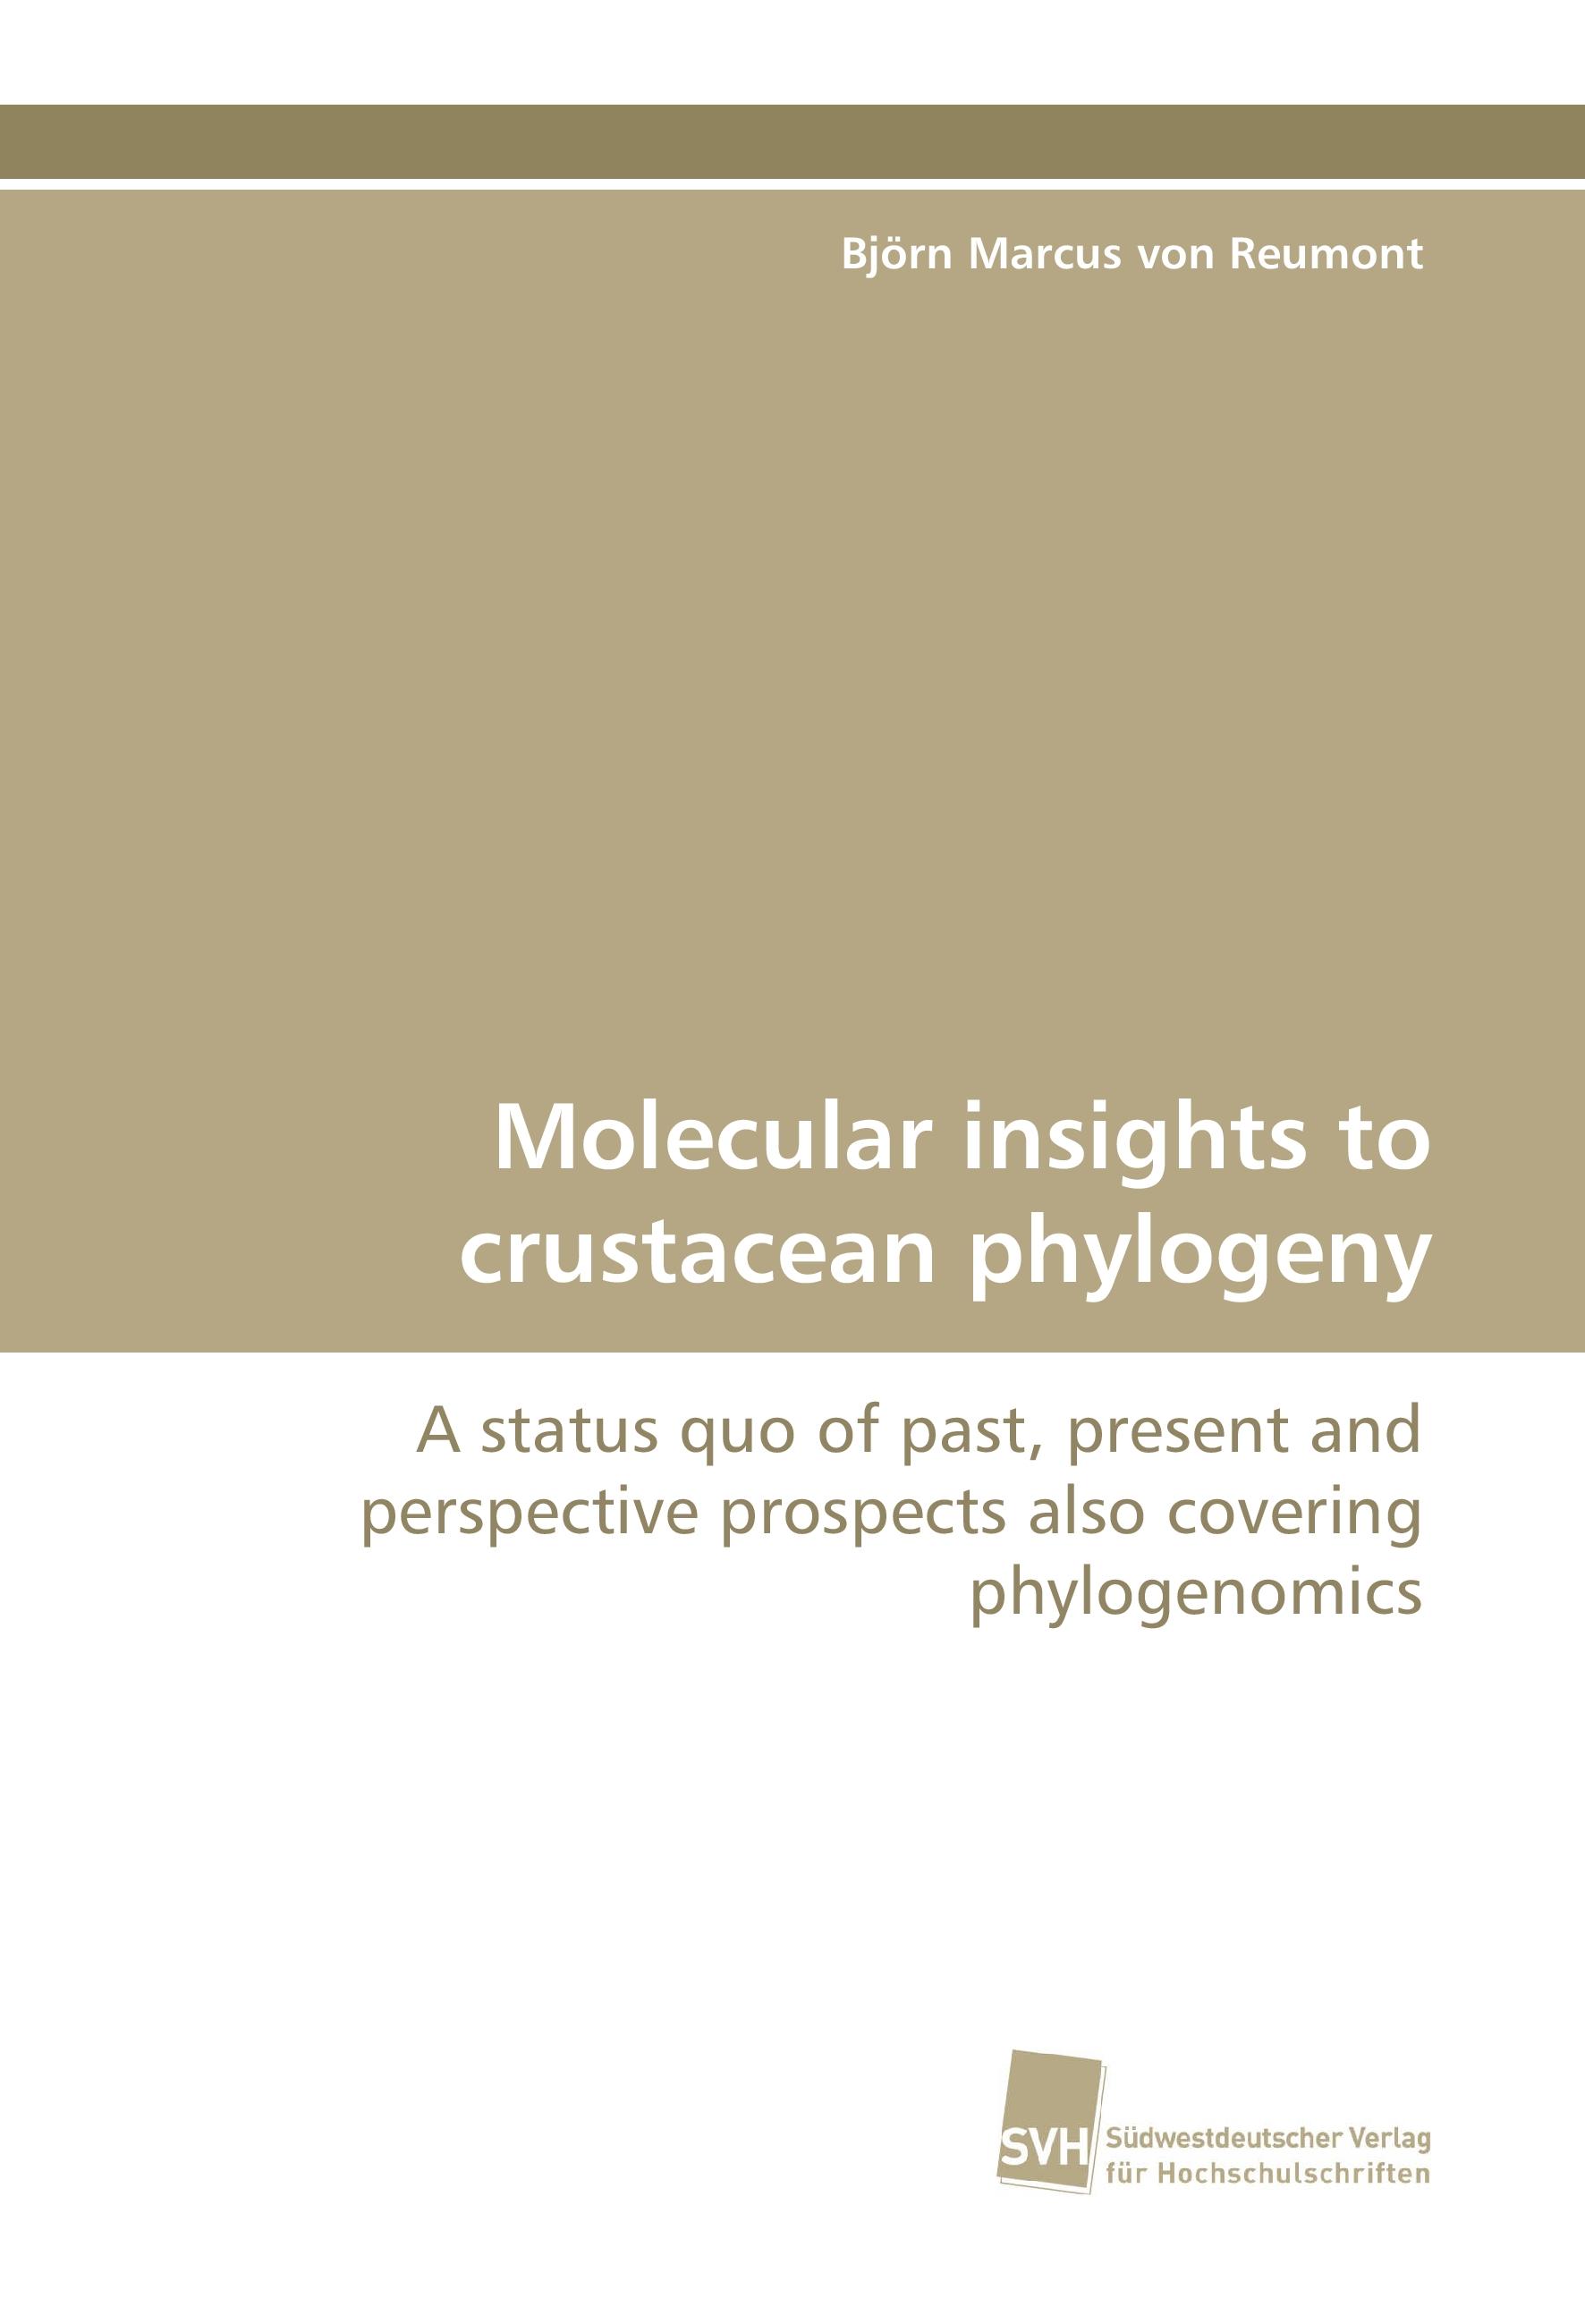 Molecular insights to crustacean phylogeny | A status quo of past, present and perspective prospects also covering phylogenomics | Björn Marcus von Reumont | Taschenbuch | Paperback | 320 S. | 2015 - Reumont, Björn Marcus von